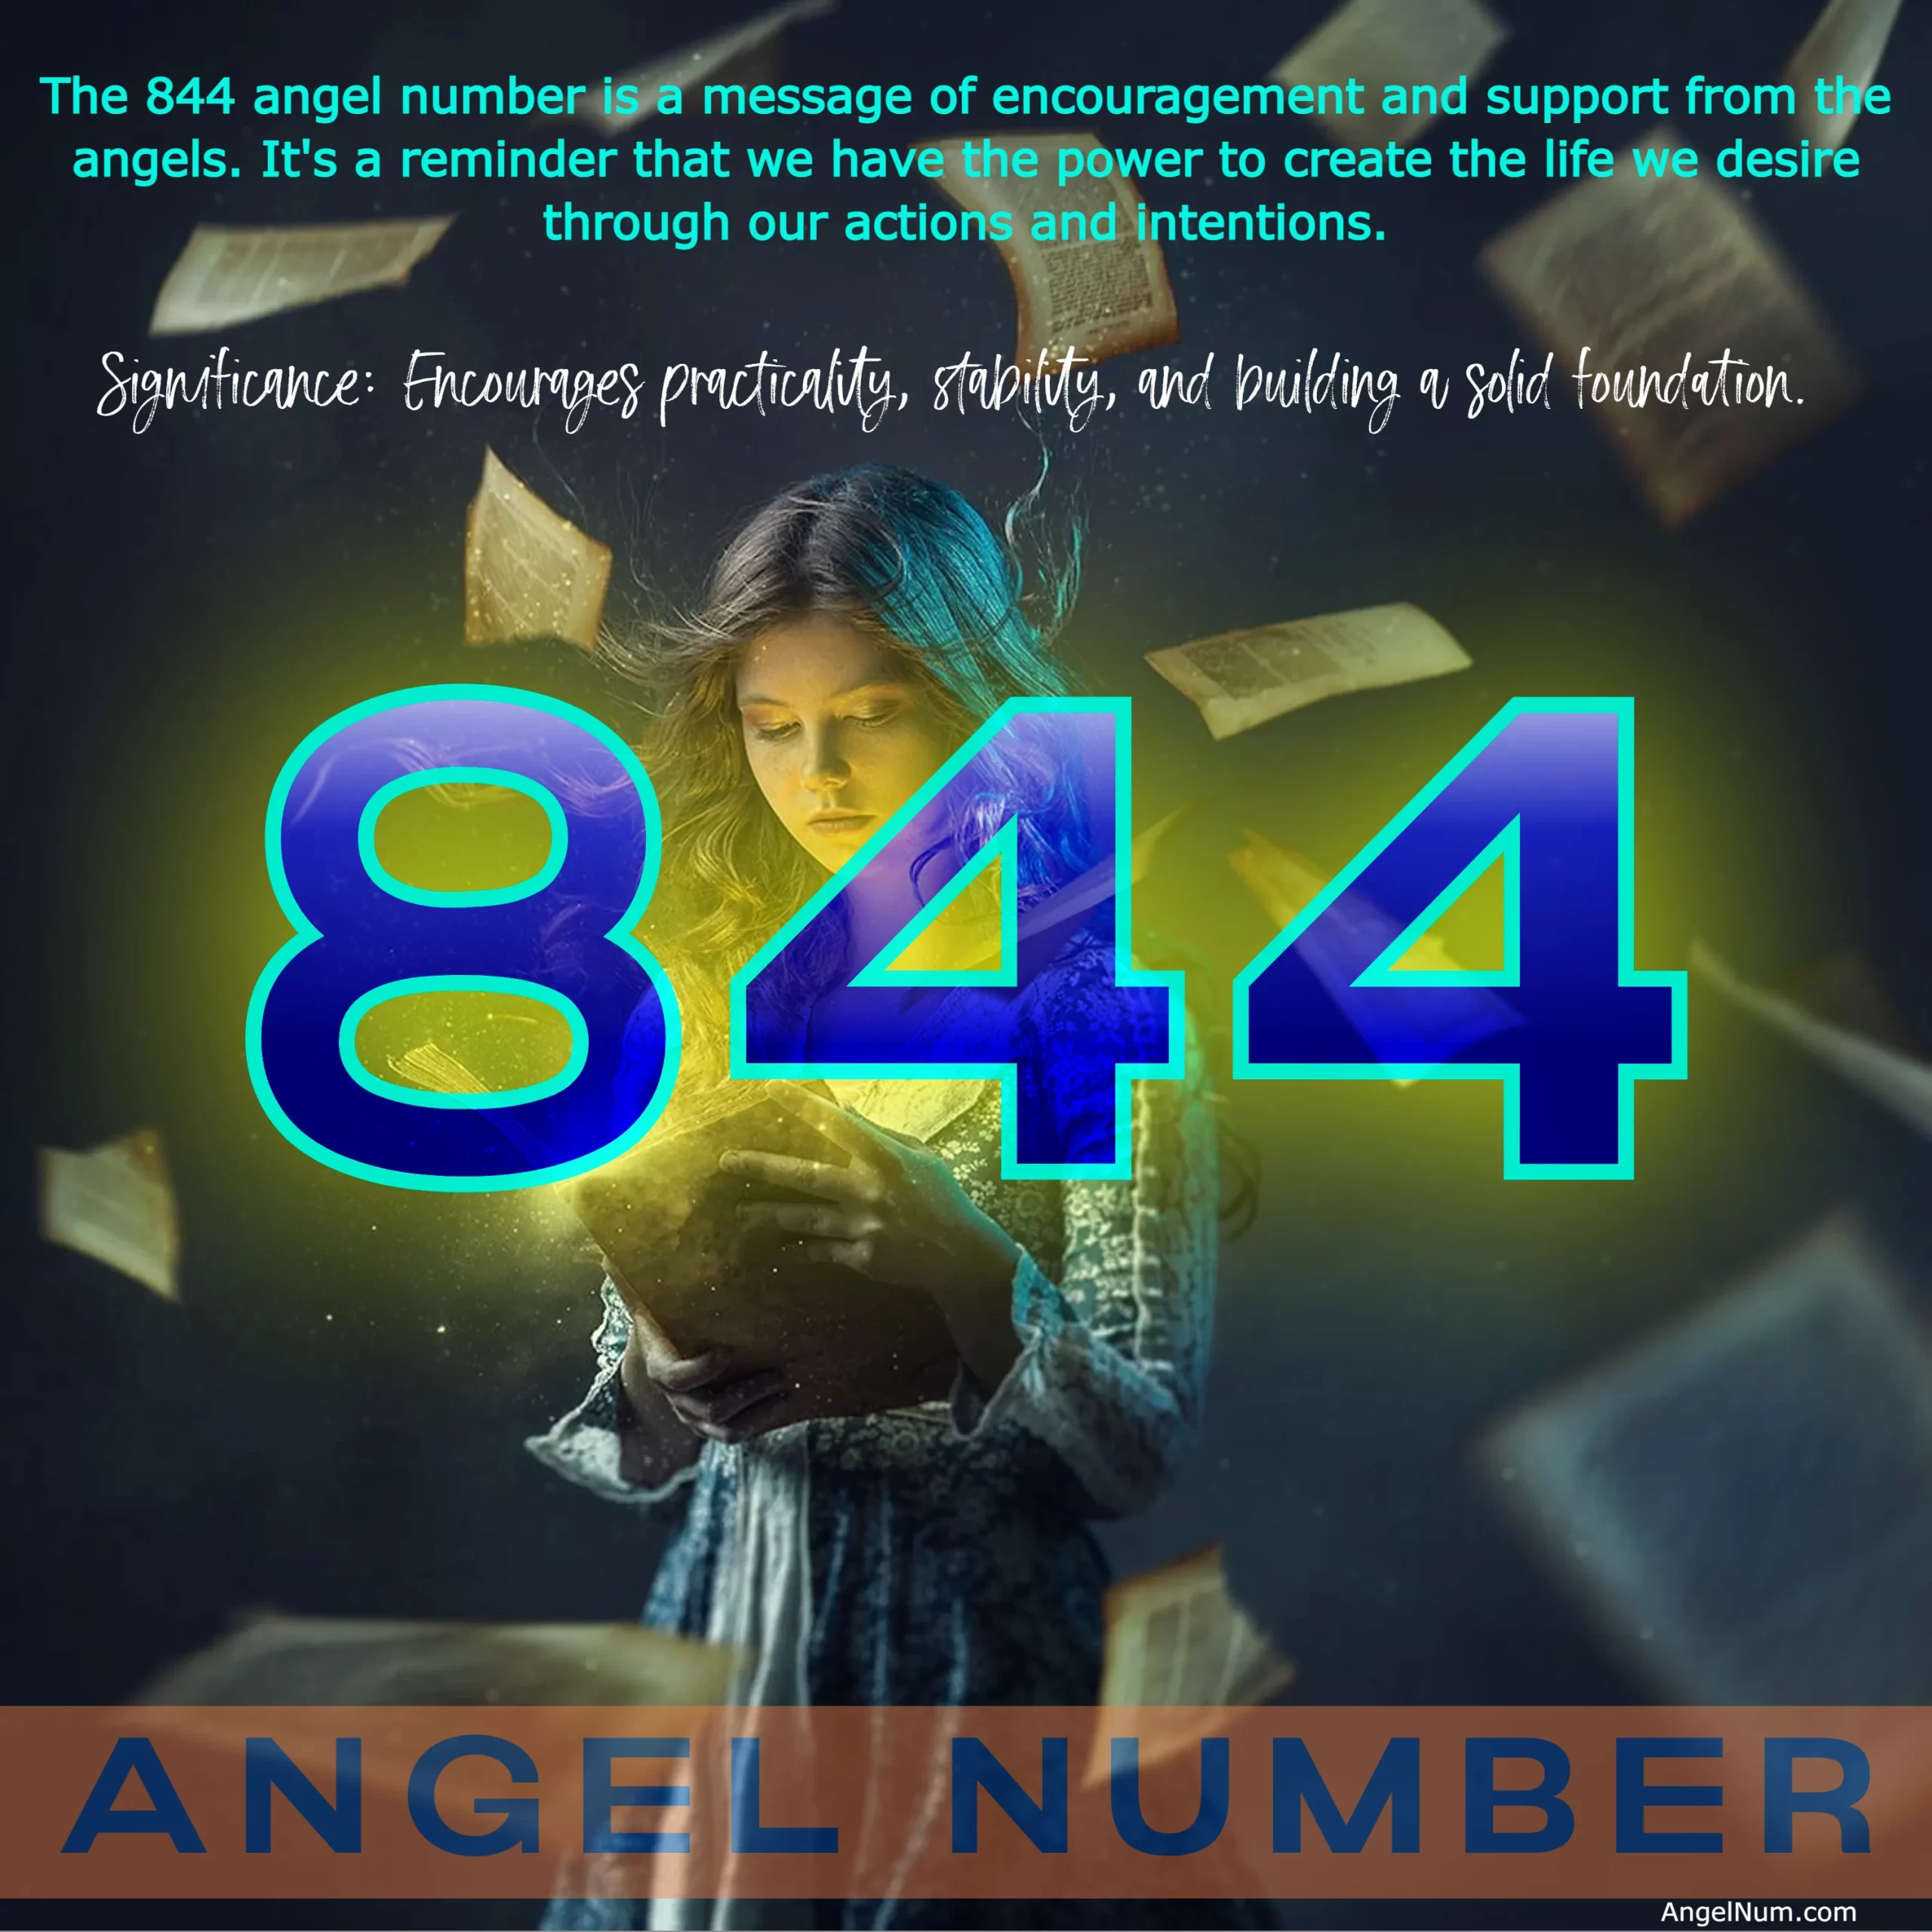 Discovering the Meaning and Significance of Angel Number 844